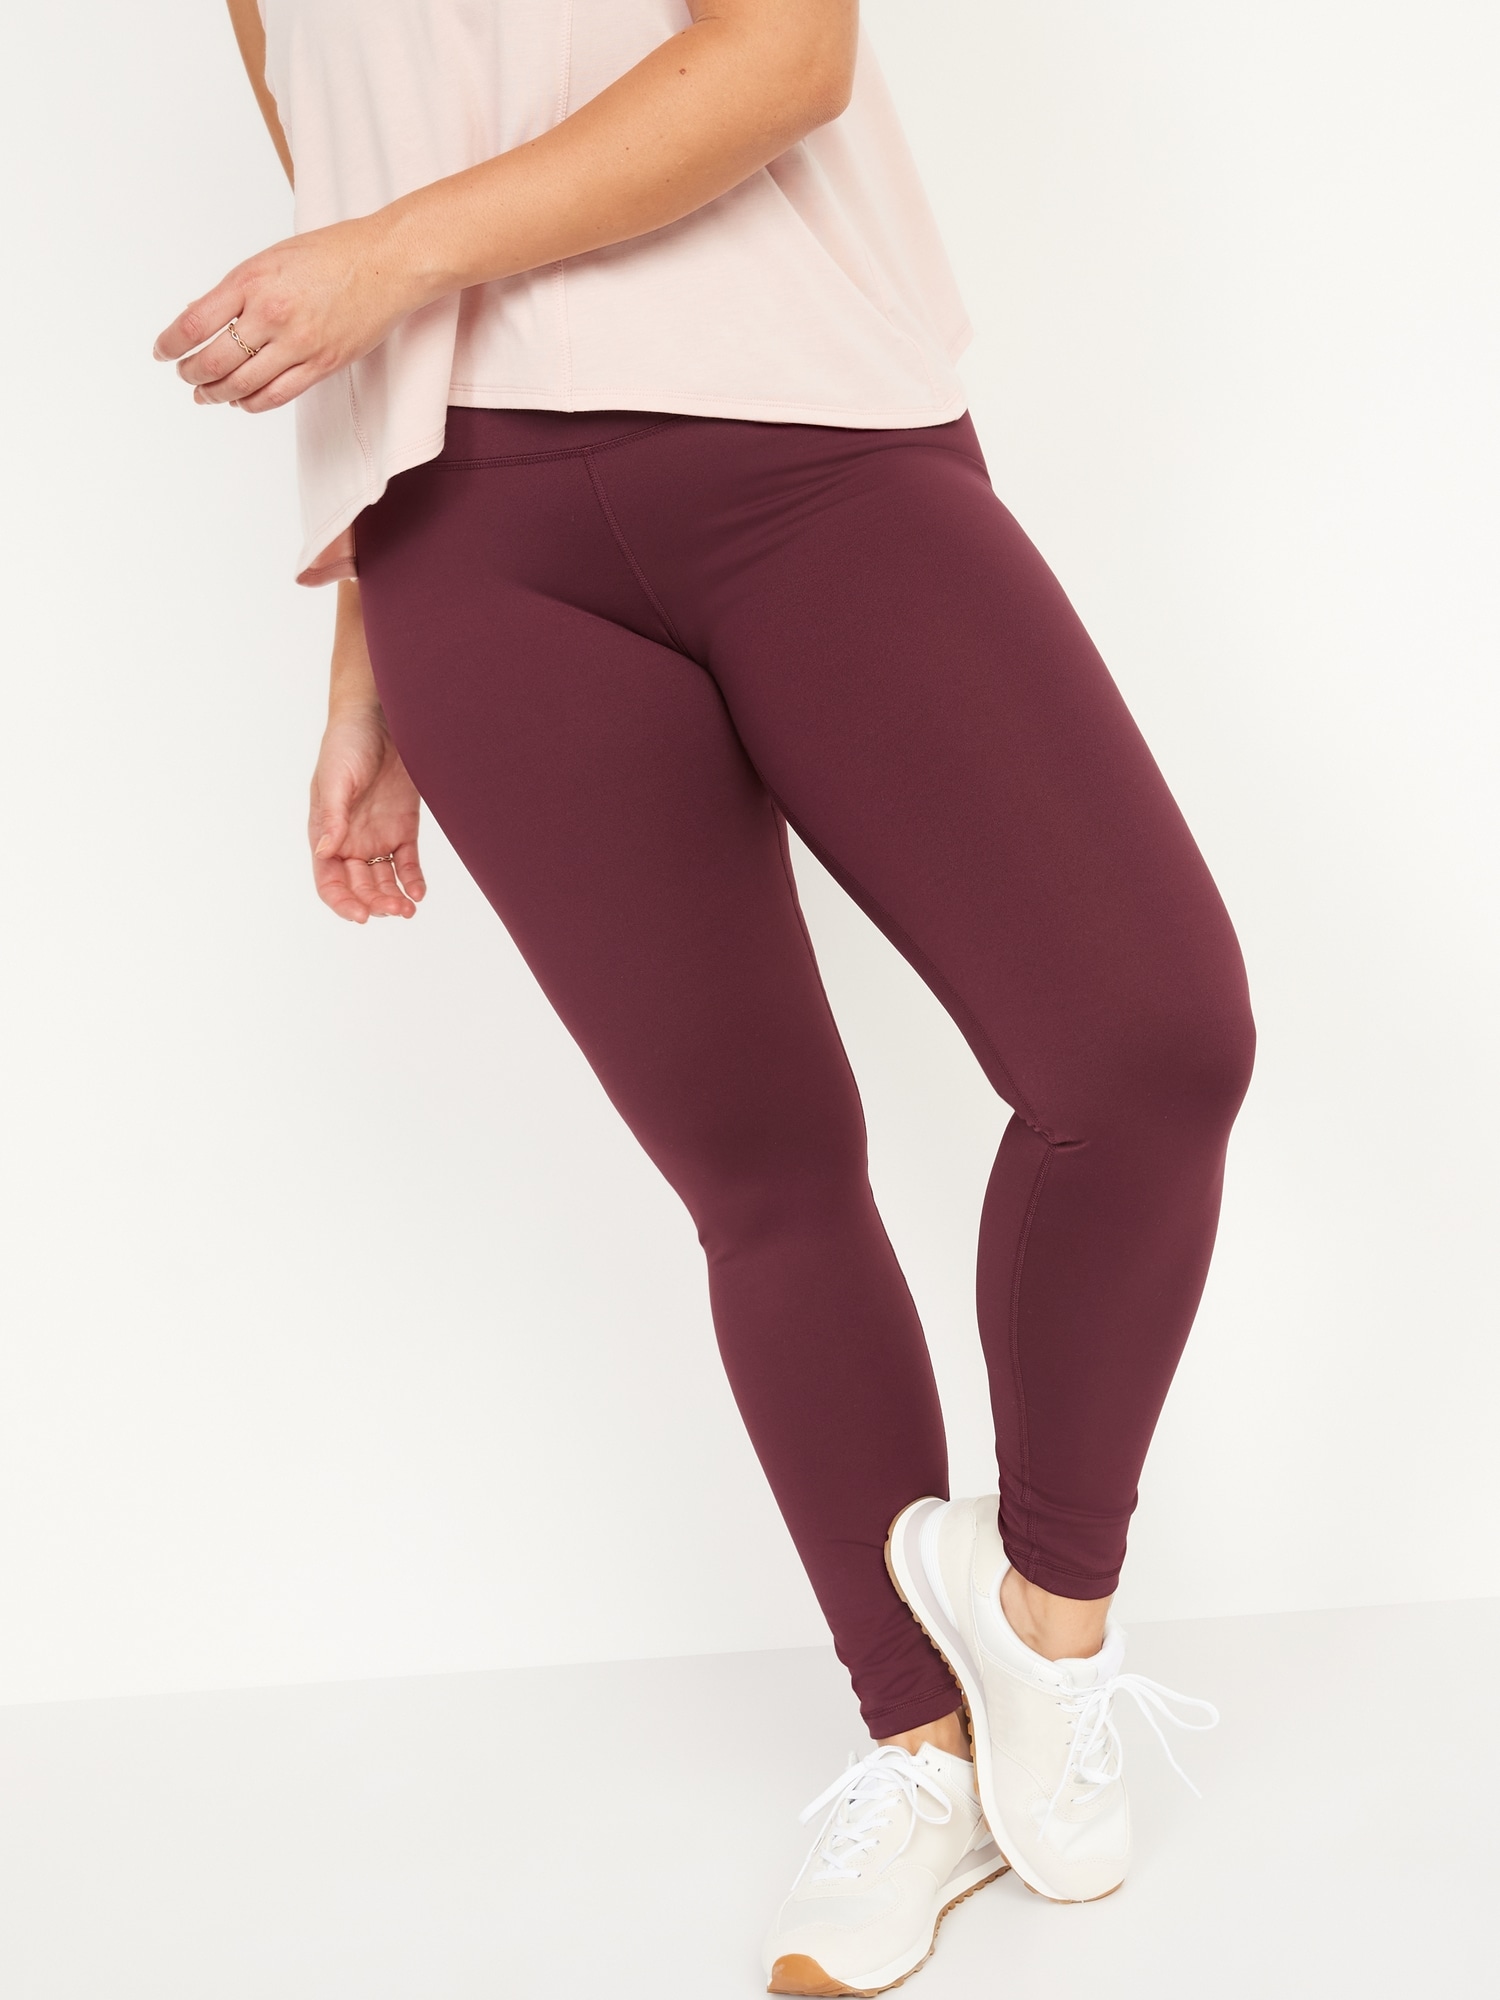 Women's High Waisted Cotton Compression Leggings. • Long, (7306343)